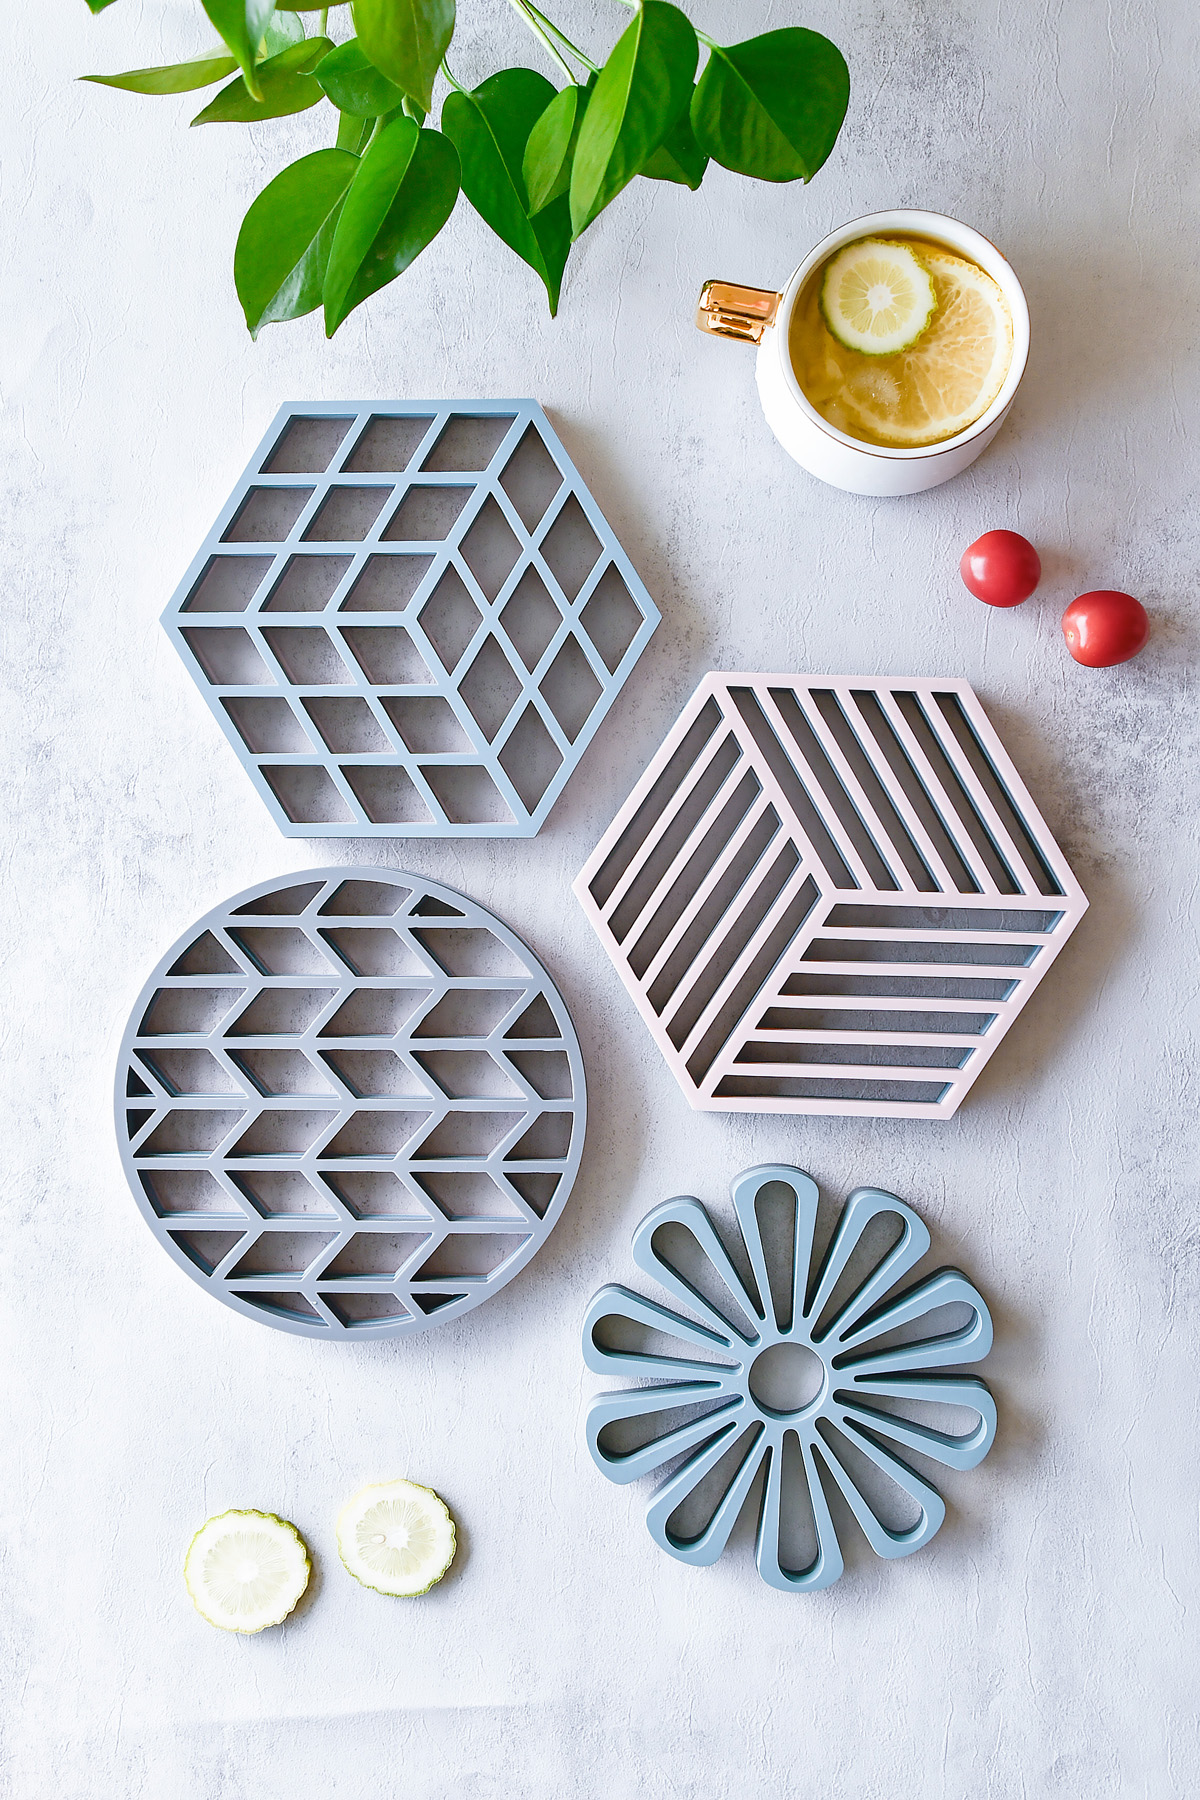 1pc silicone trivet mat hot pads holders for table countertop trivet insulated flexible non slip heat resistant kitchen hot pads trivets for hot dishes and table details 0